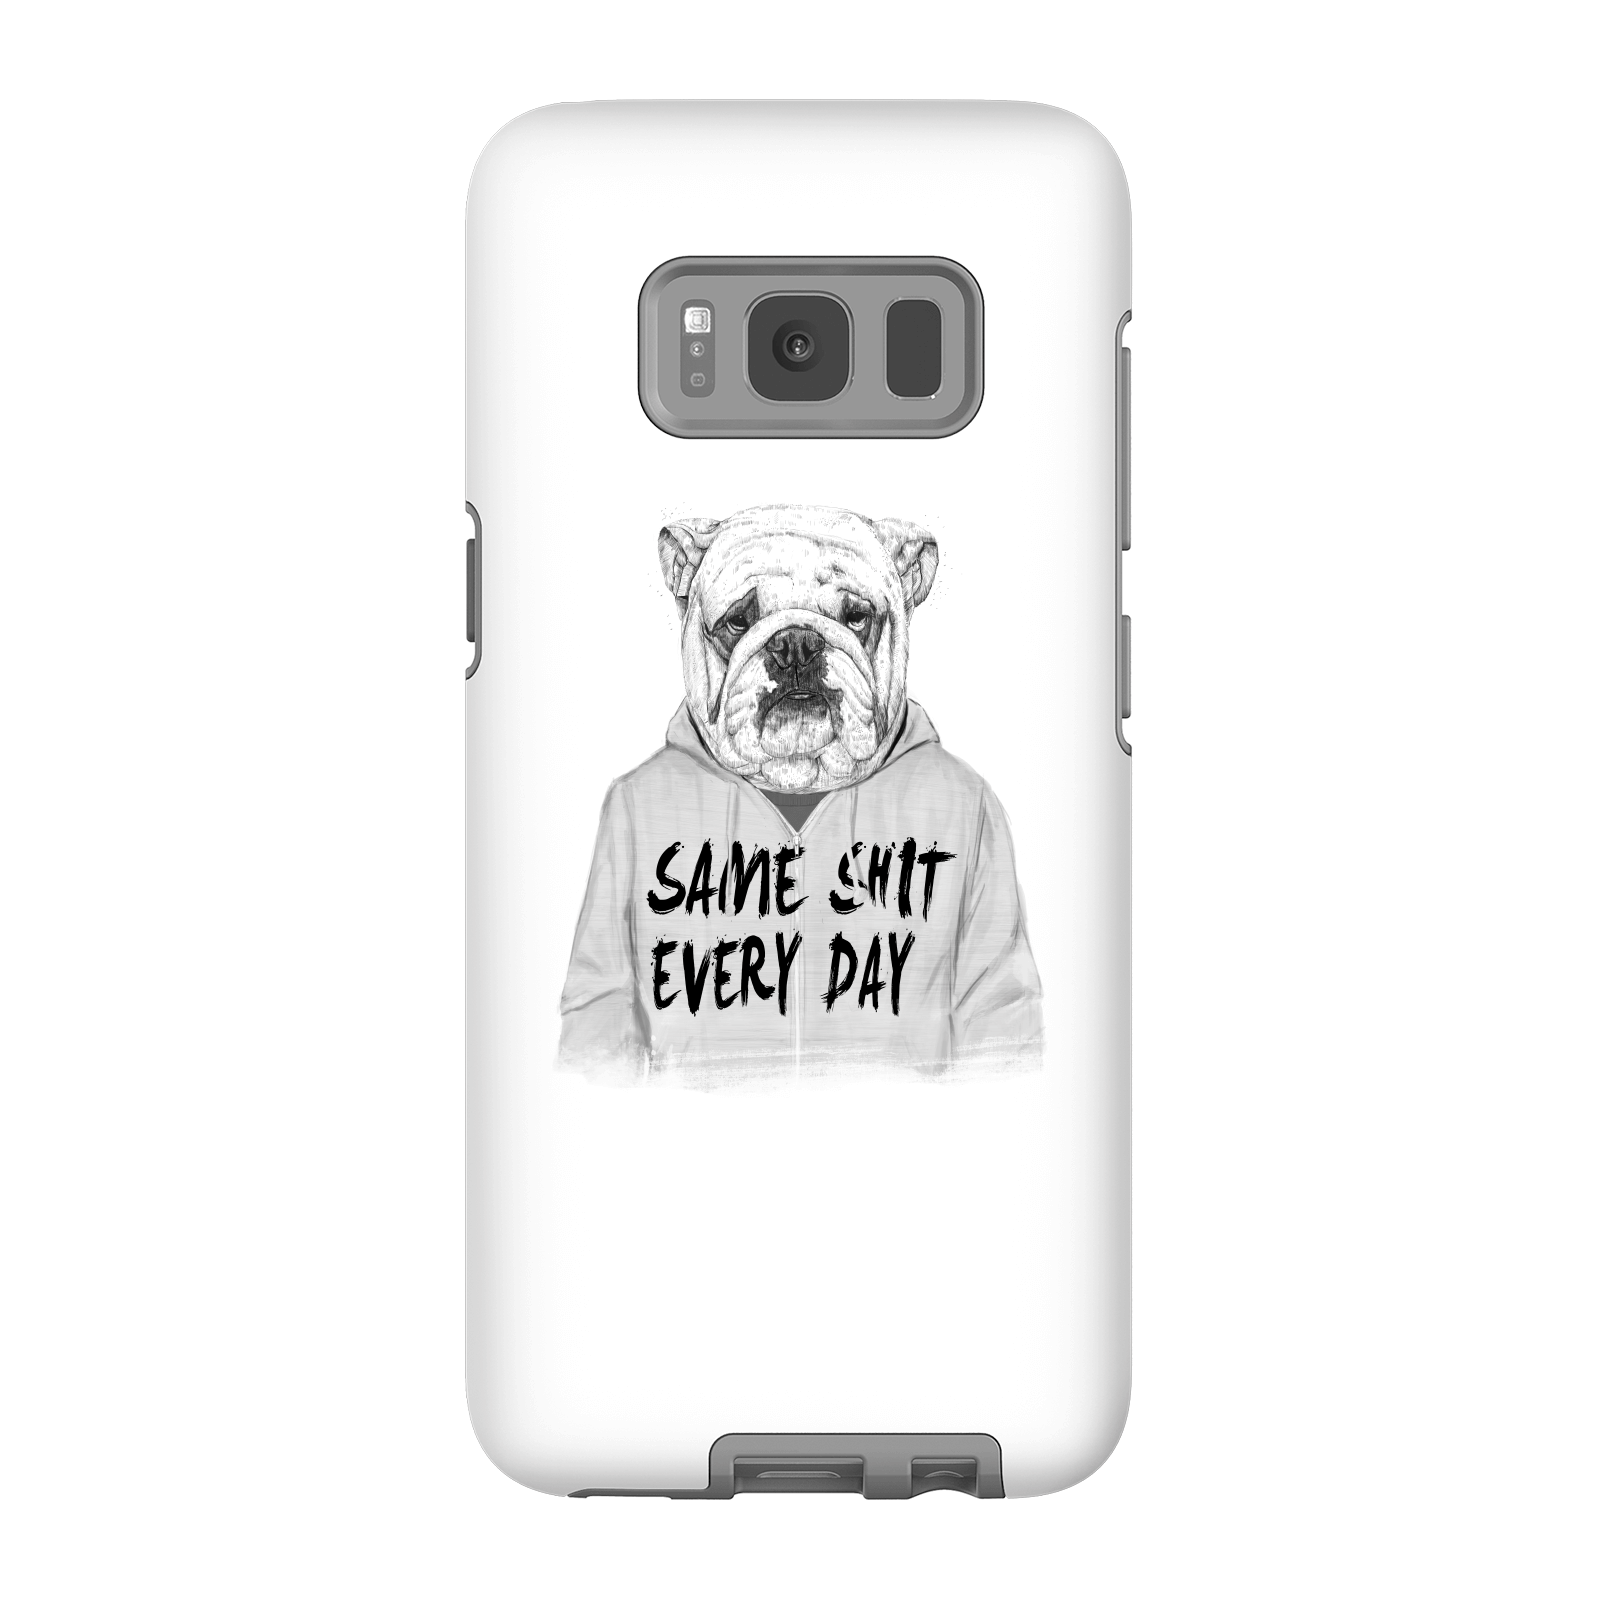 balazs solti same shit every day phone case for iphone and android - samsung s8 - tough case - gloss